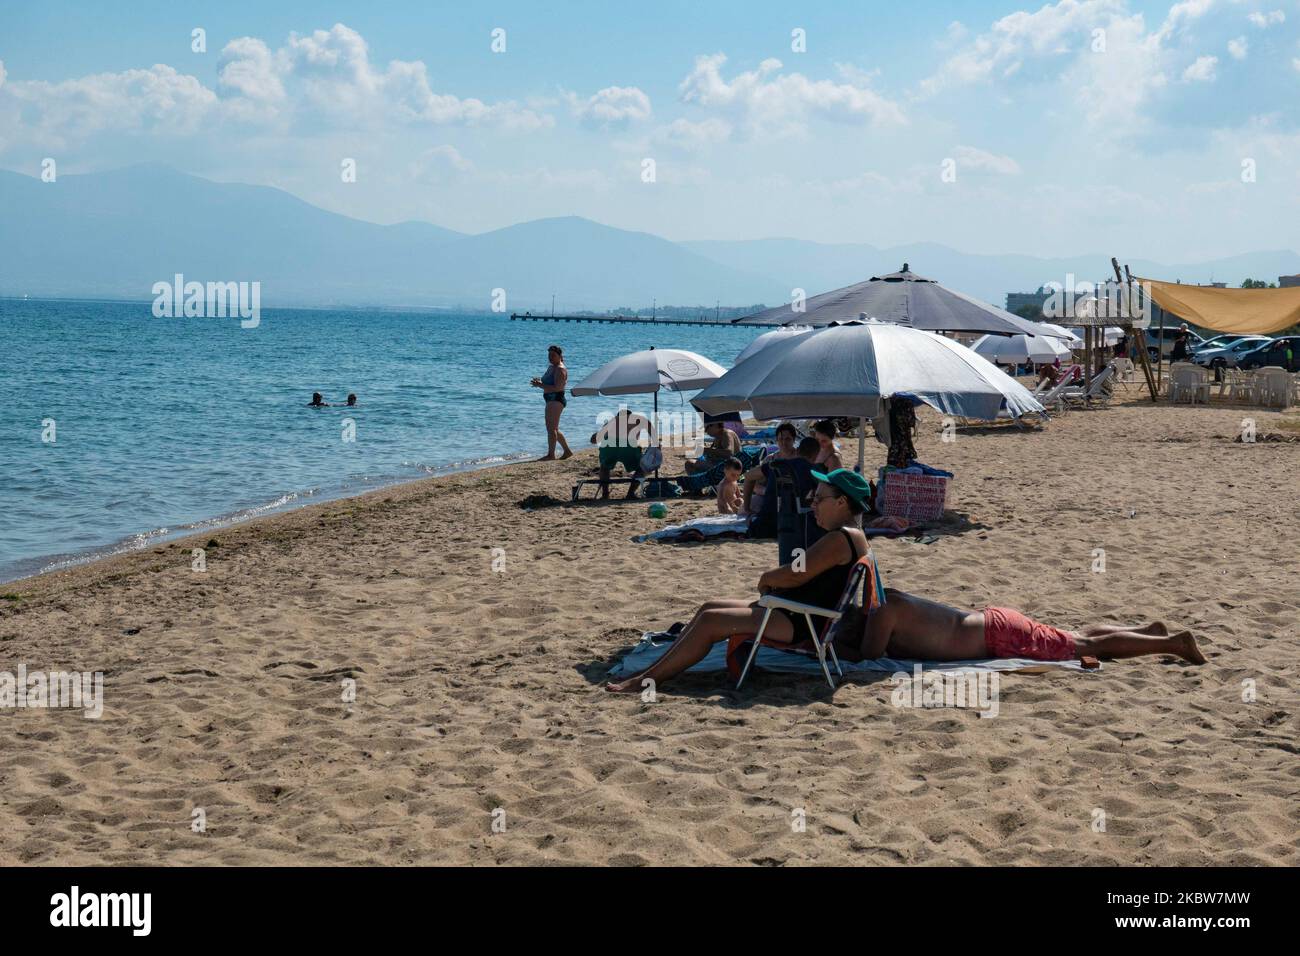 Everyday life at the sandy beach of Agia Triada near Thessaloniki in Greece on July 26, 2020. Agia Triada is a summer tourist destination for locals and foreign tourists for holidays mostly from the Balkan countries. The beach is awarded with Blue Flag, has typical for Greek Beaches and the Aegean Sea, crystal clear transparent sea water, golden sand and many tourism facilities such as a pedestrian waterfront road next to the shore, free showers etc. There are hotels, taverns, restaurants, bars and beach bars in the area, which is just a few minutes driving away from Thessaloniki International Stock Photo